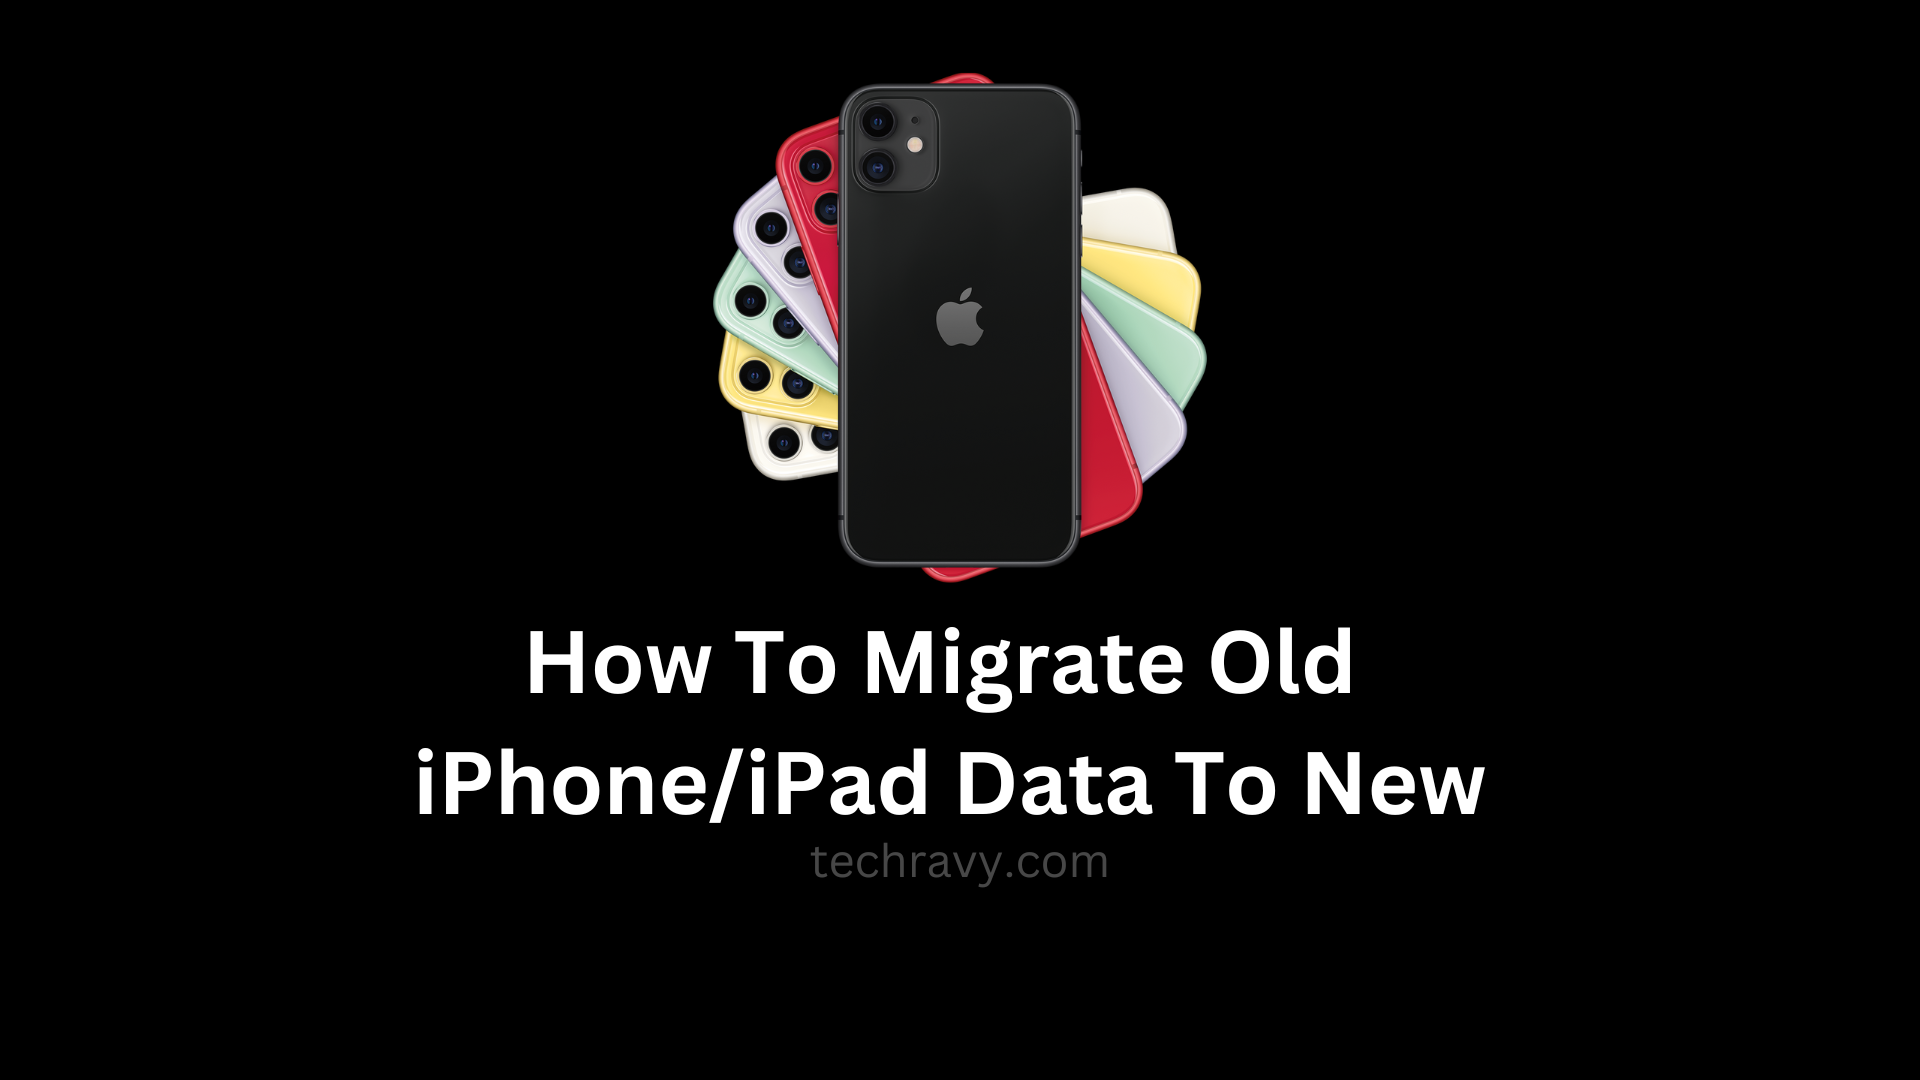 How To Migrate Old iPhoneiPad Data To New